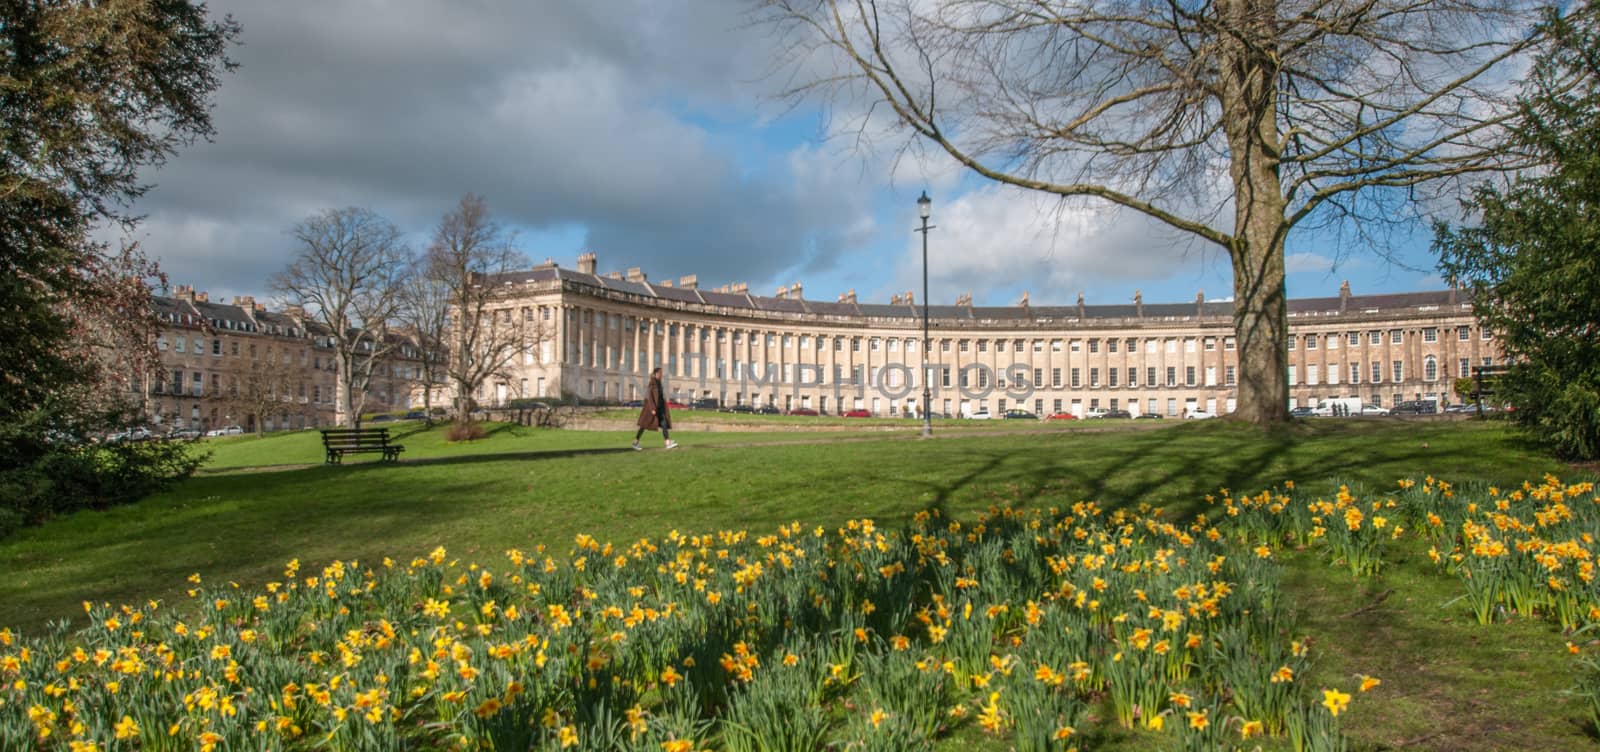 the iconic royal crecent in bath is the backdrop against the early spring daffodils